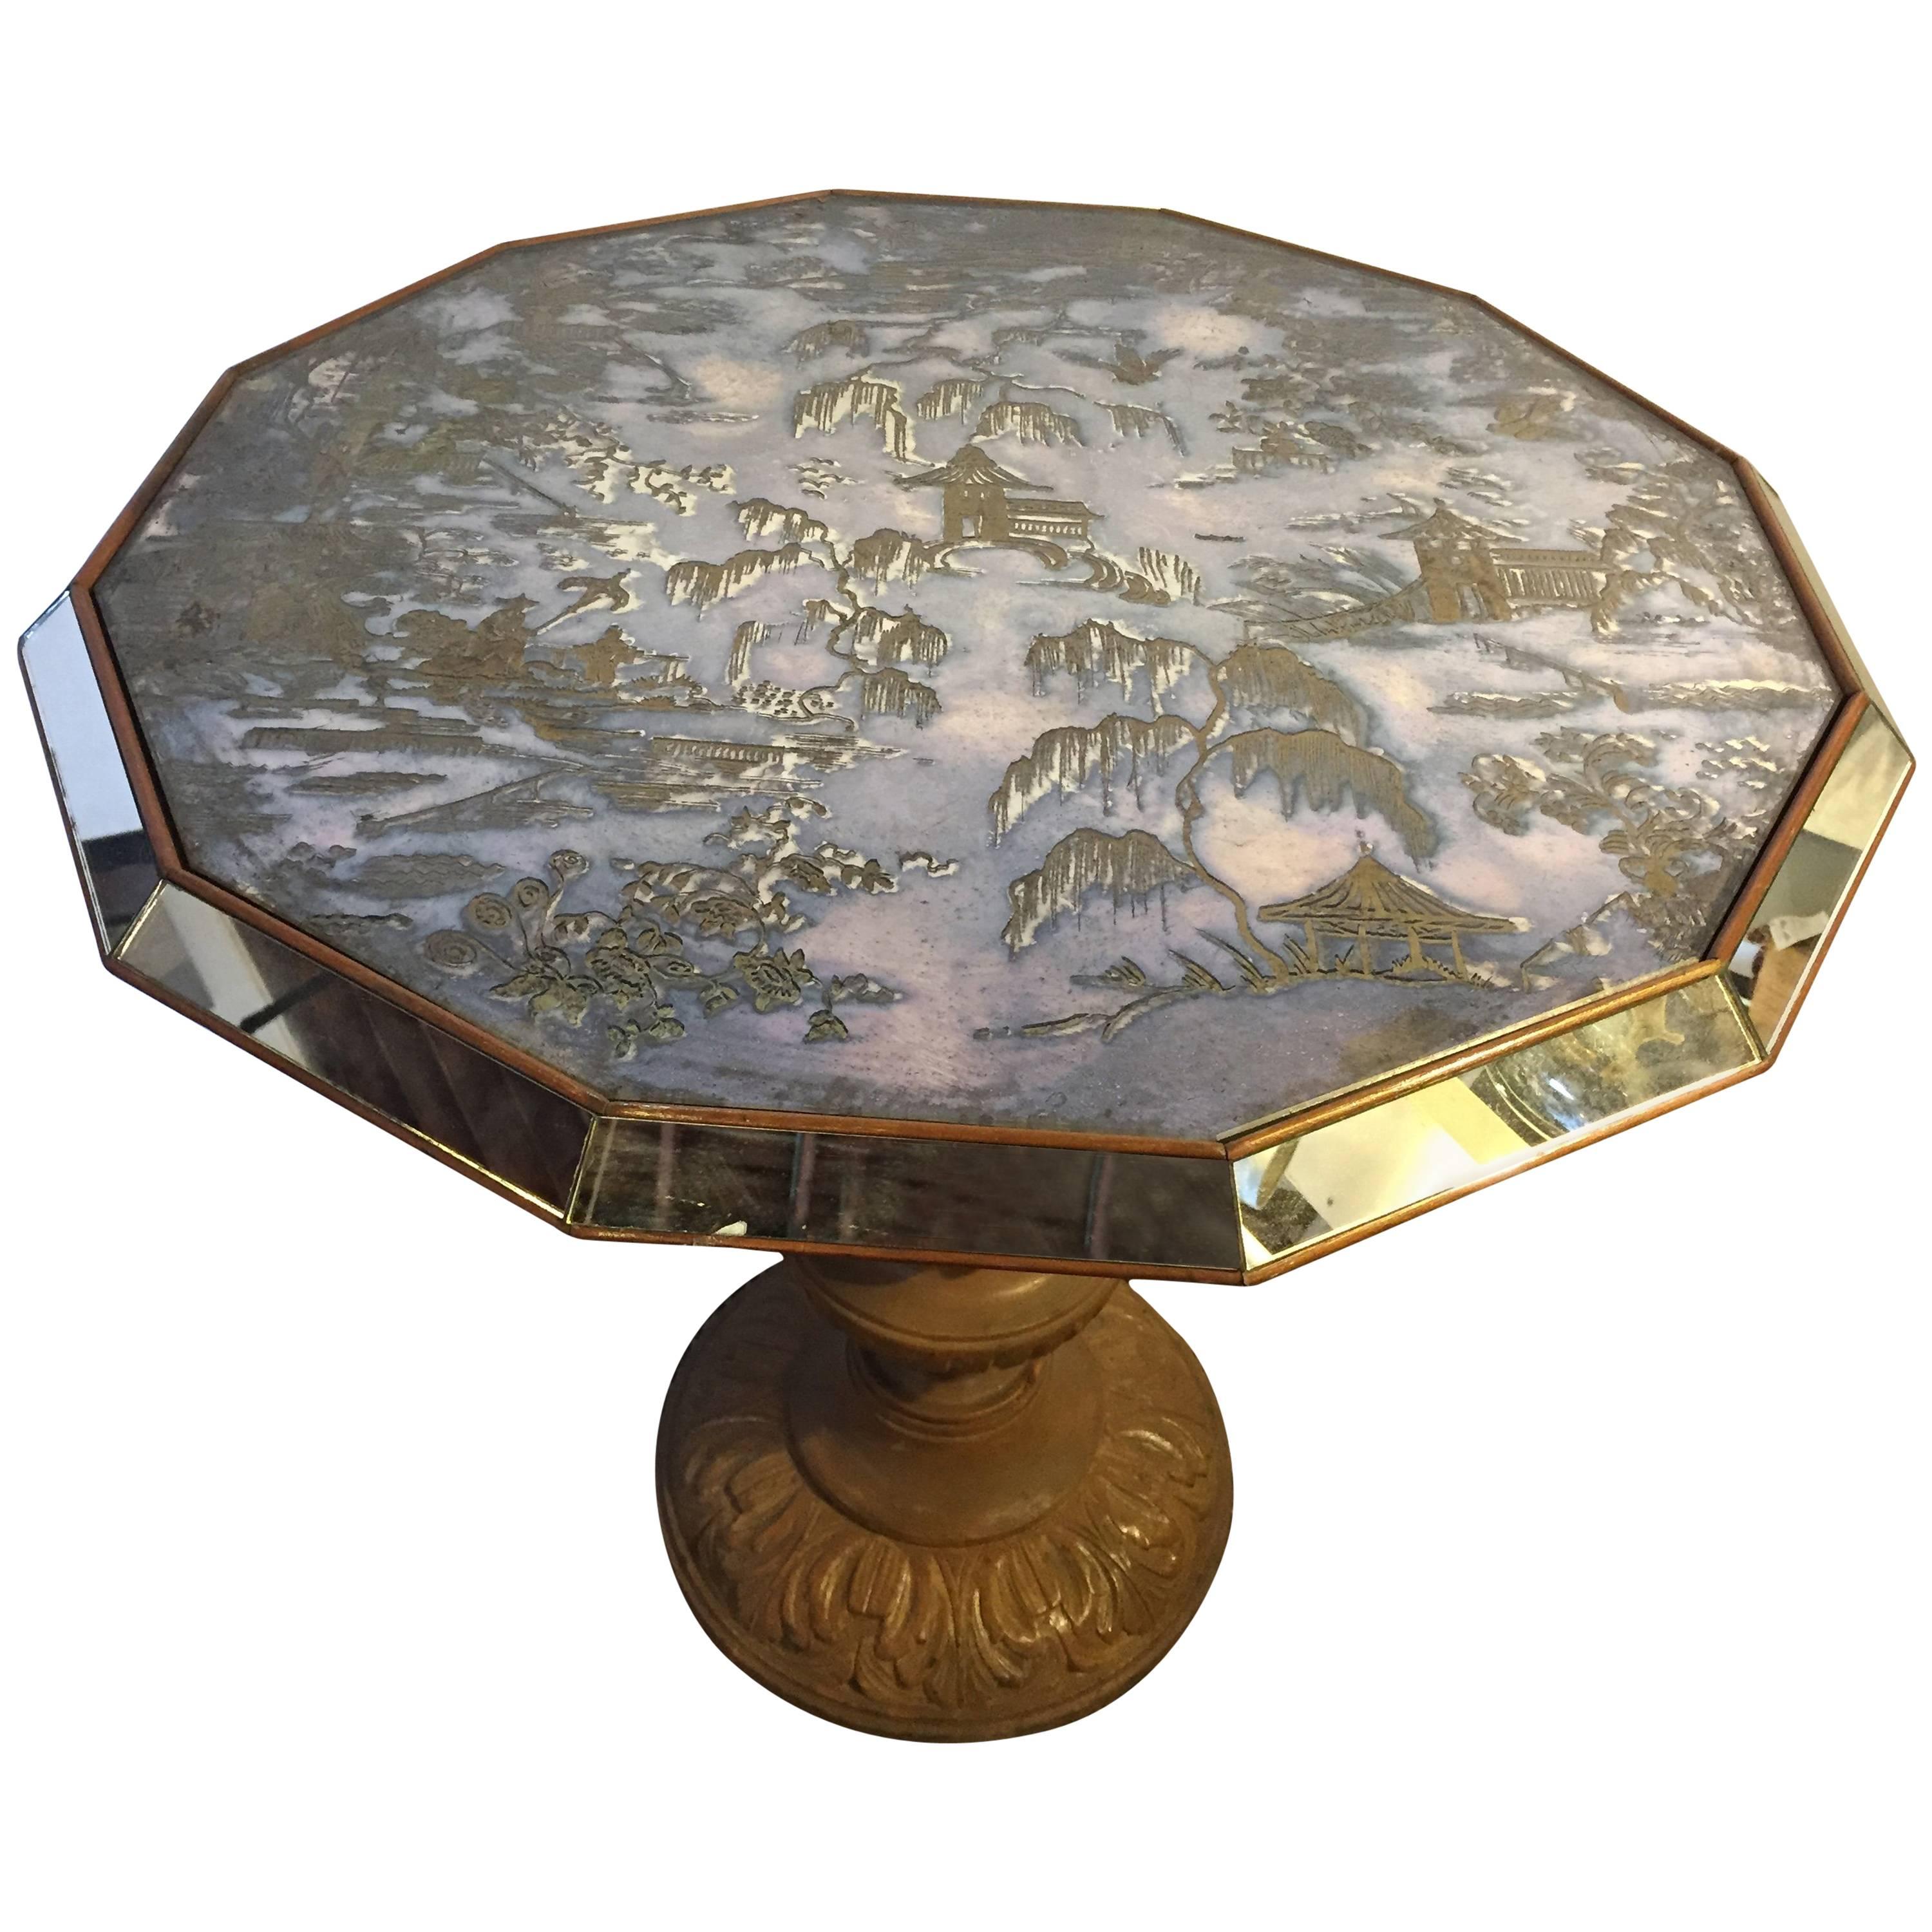 Chinoiserie Style Center Table with Eglomise Glass Top on a Single Pedestal